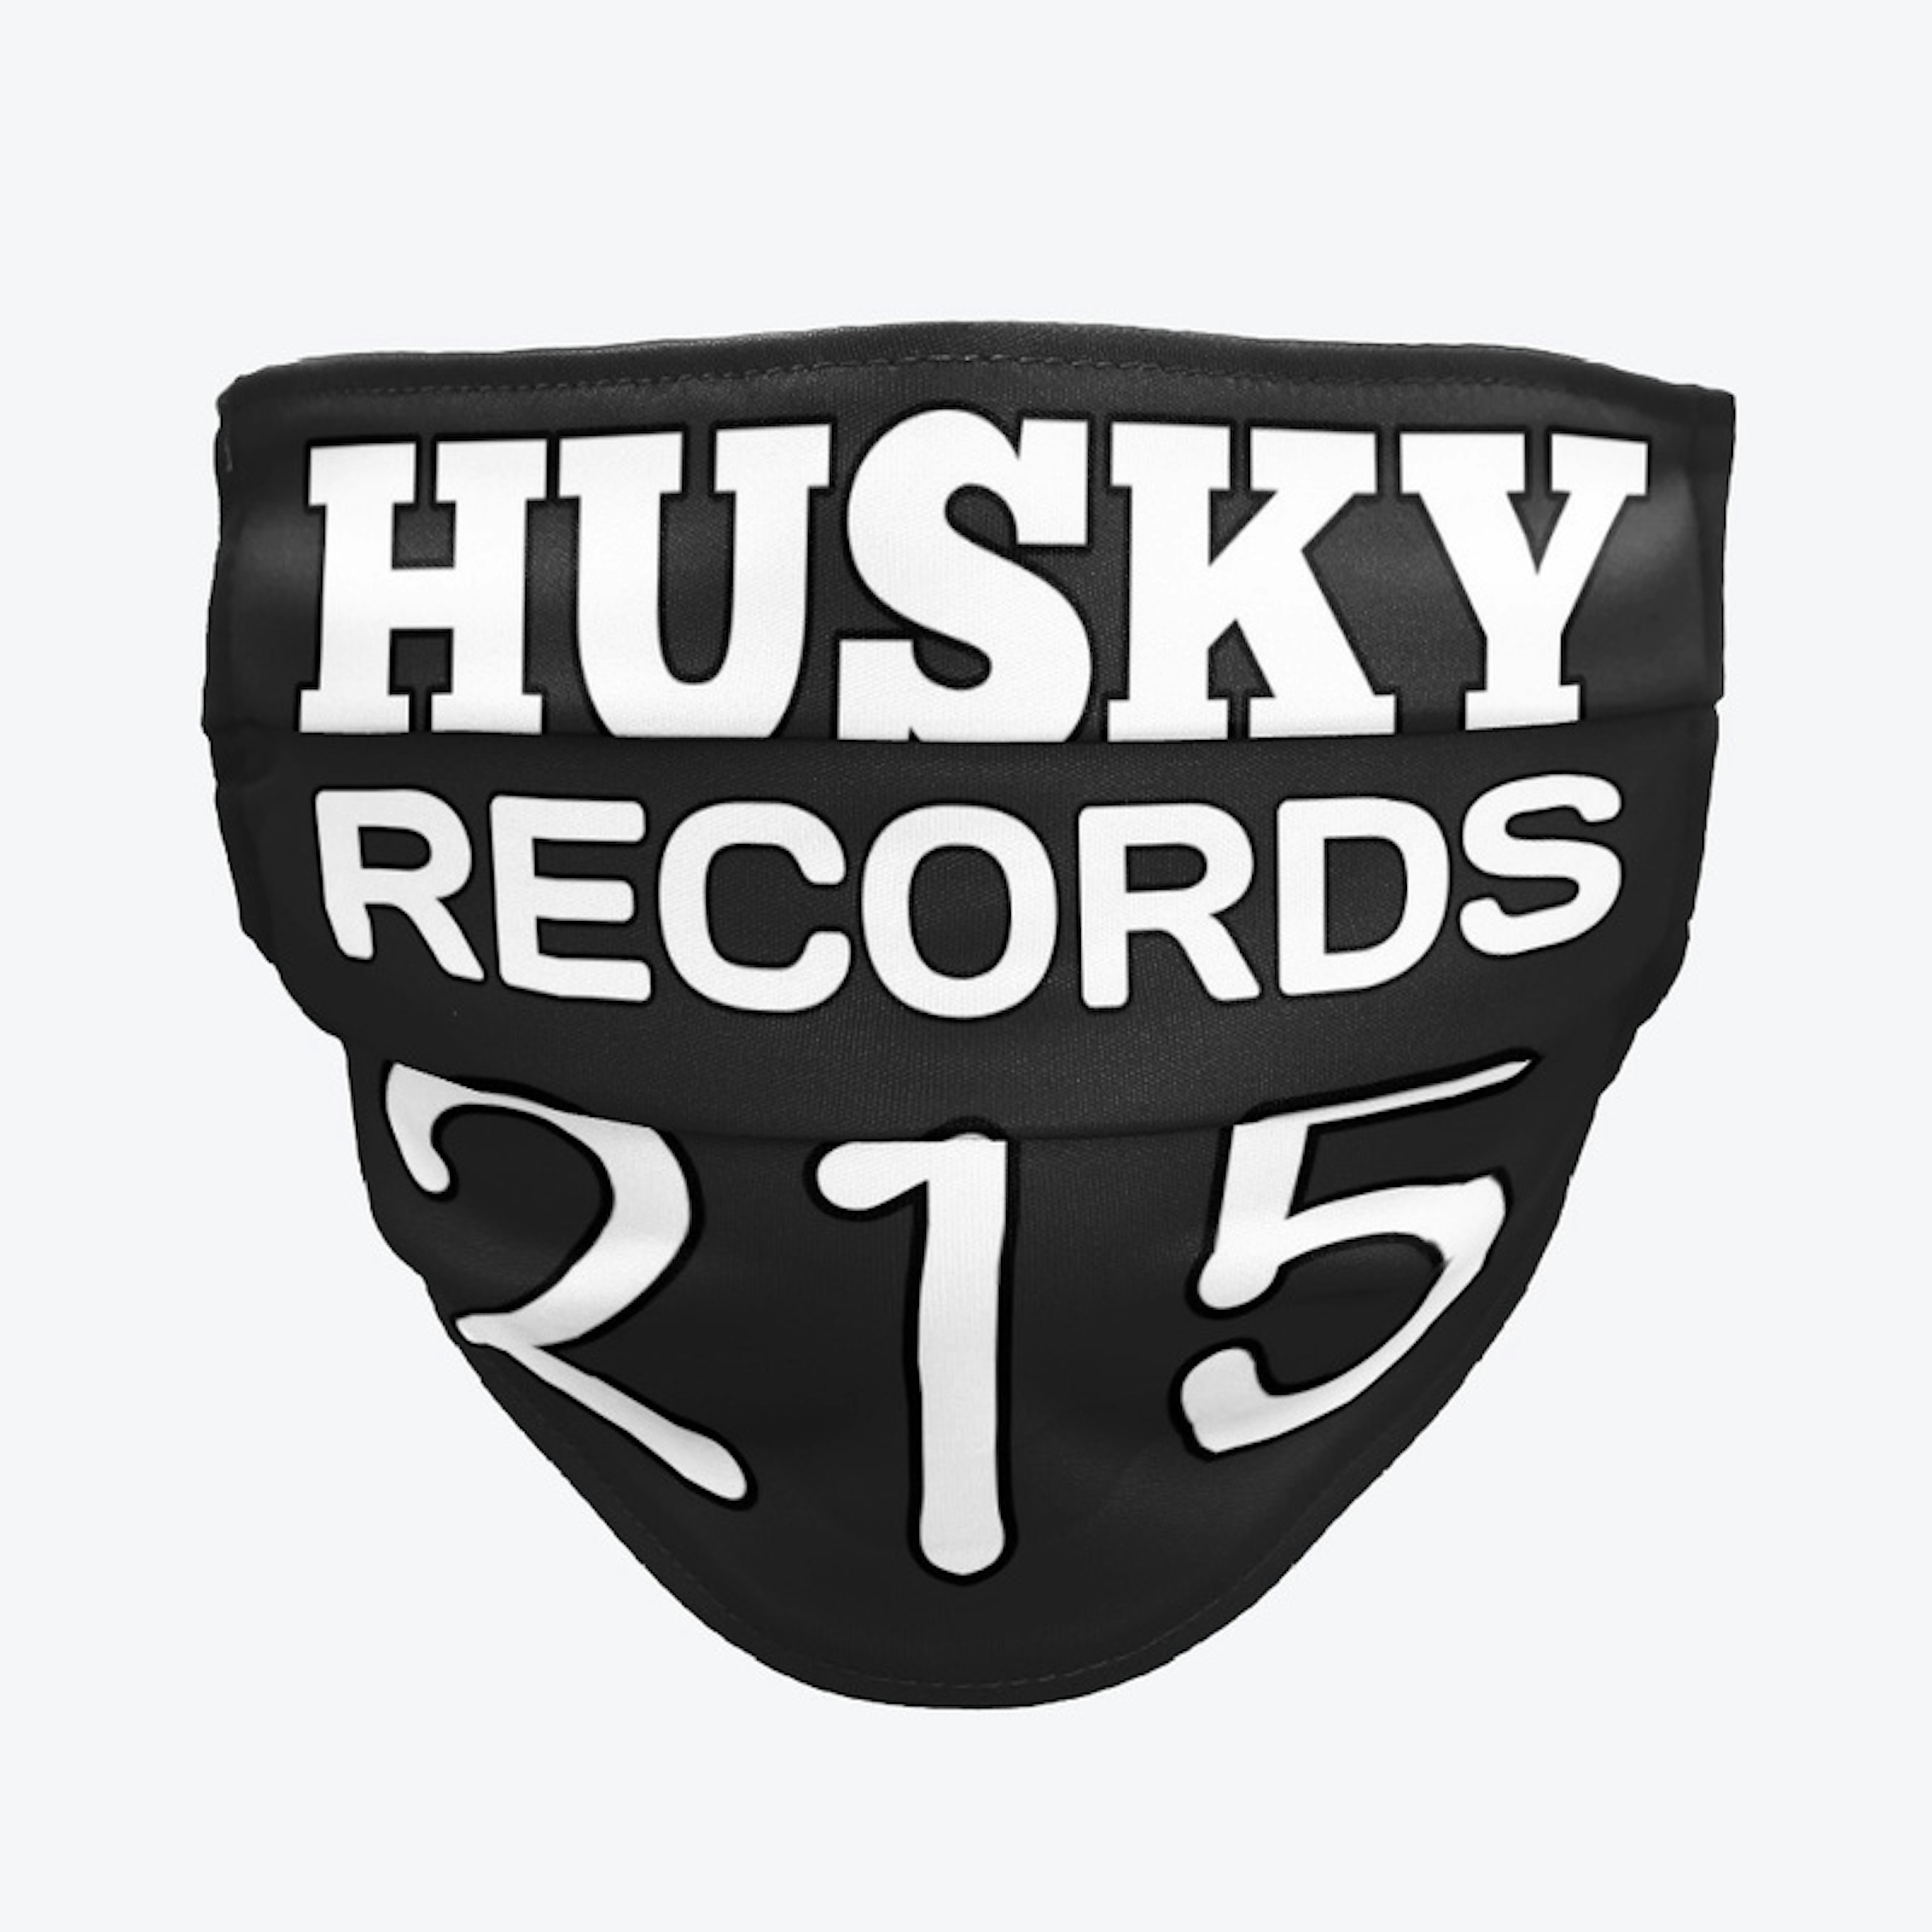 Husky Records 215 The Collection